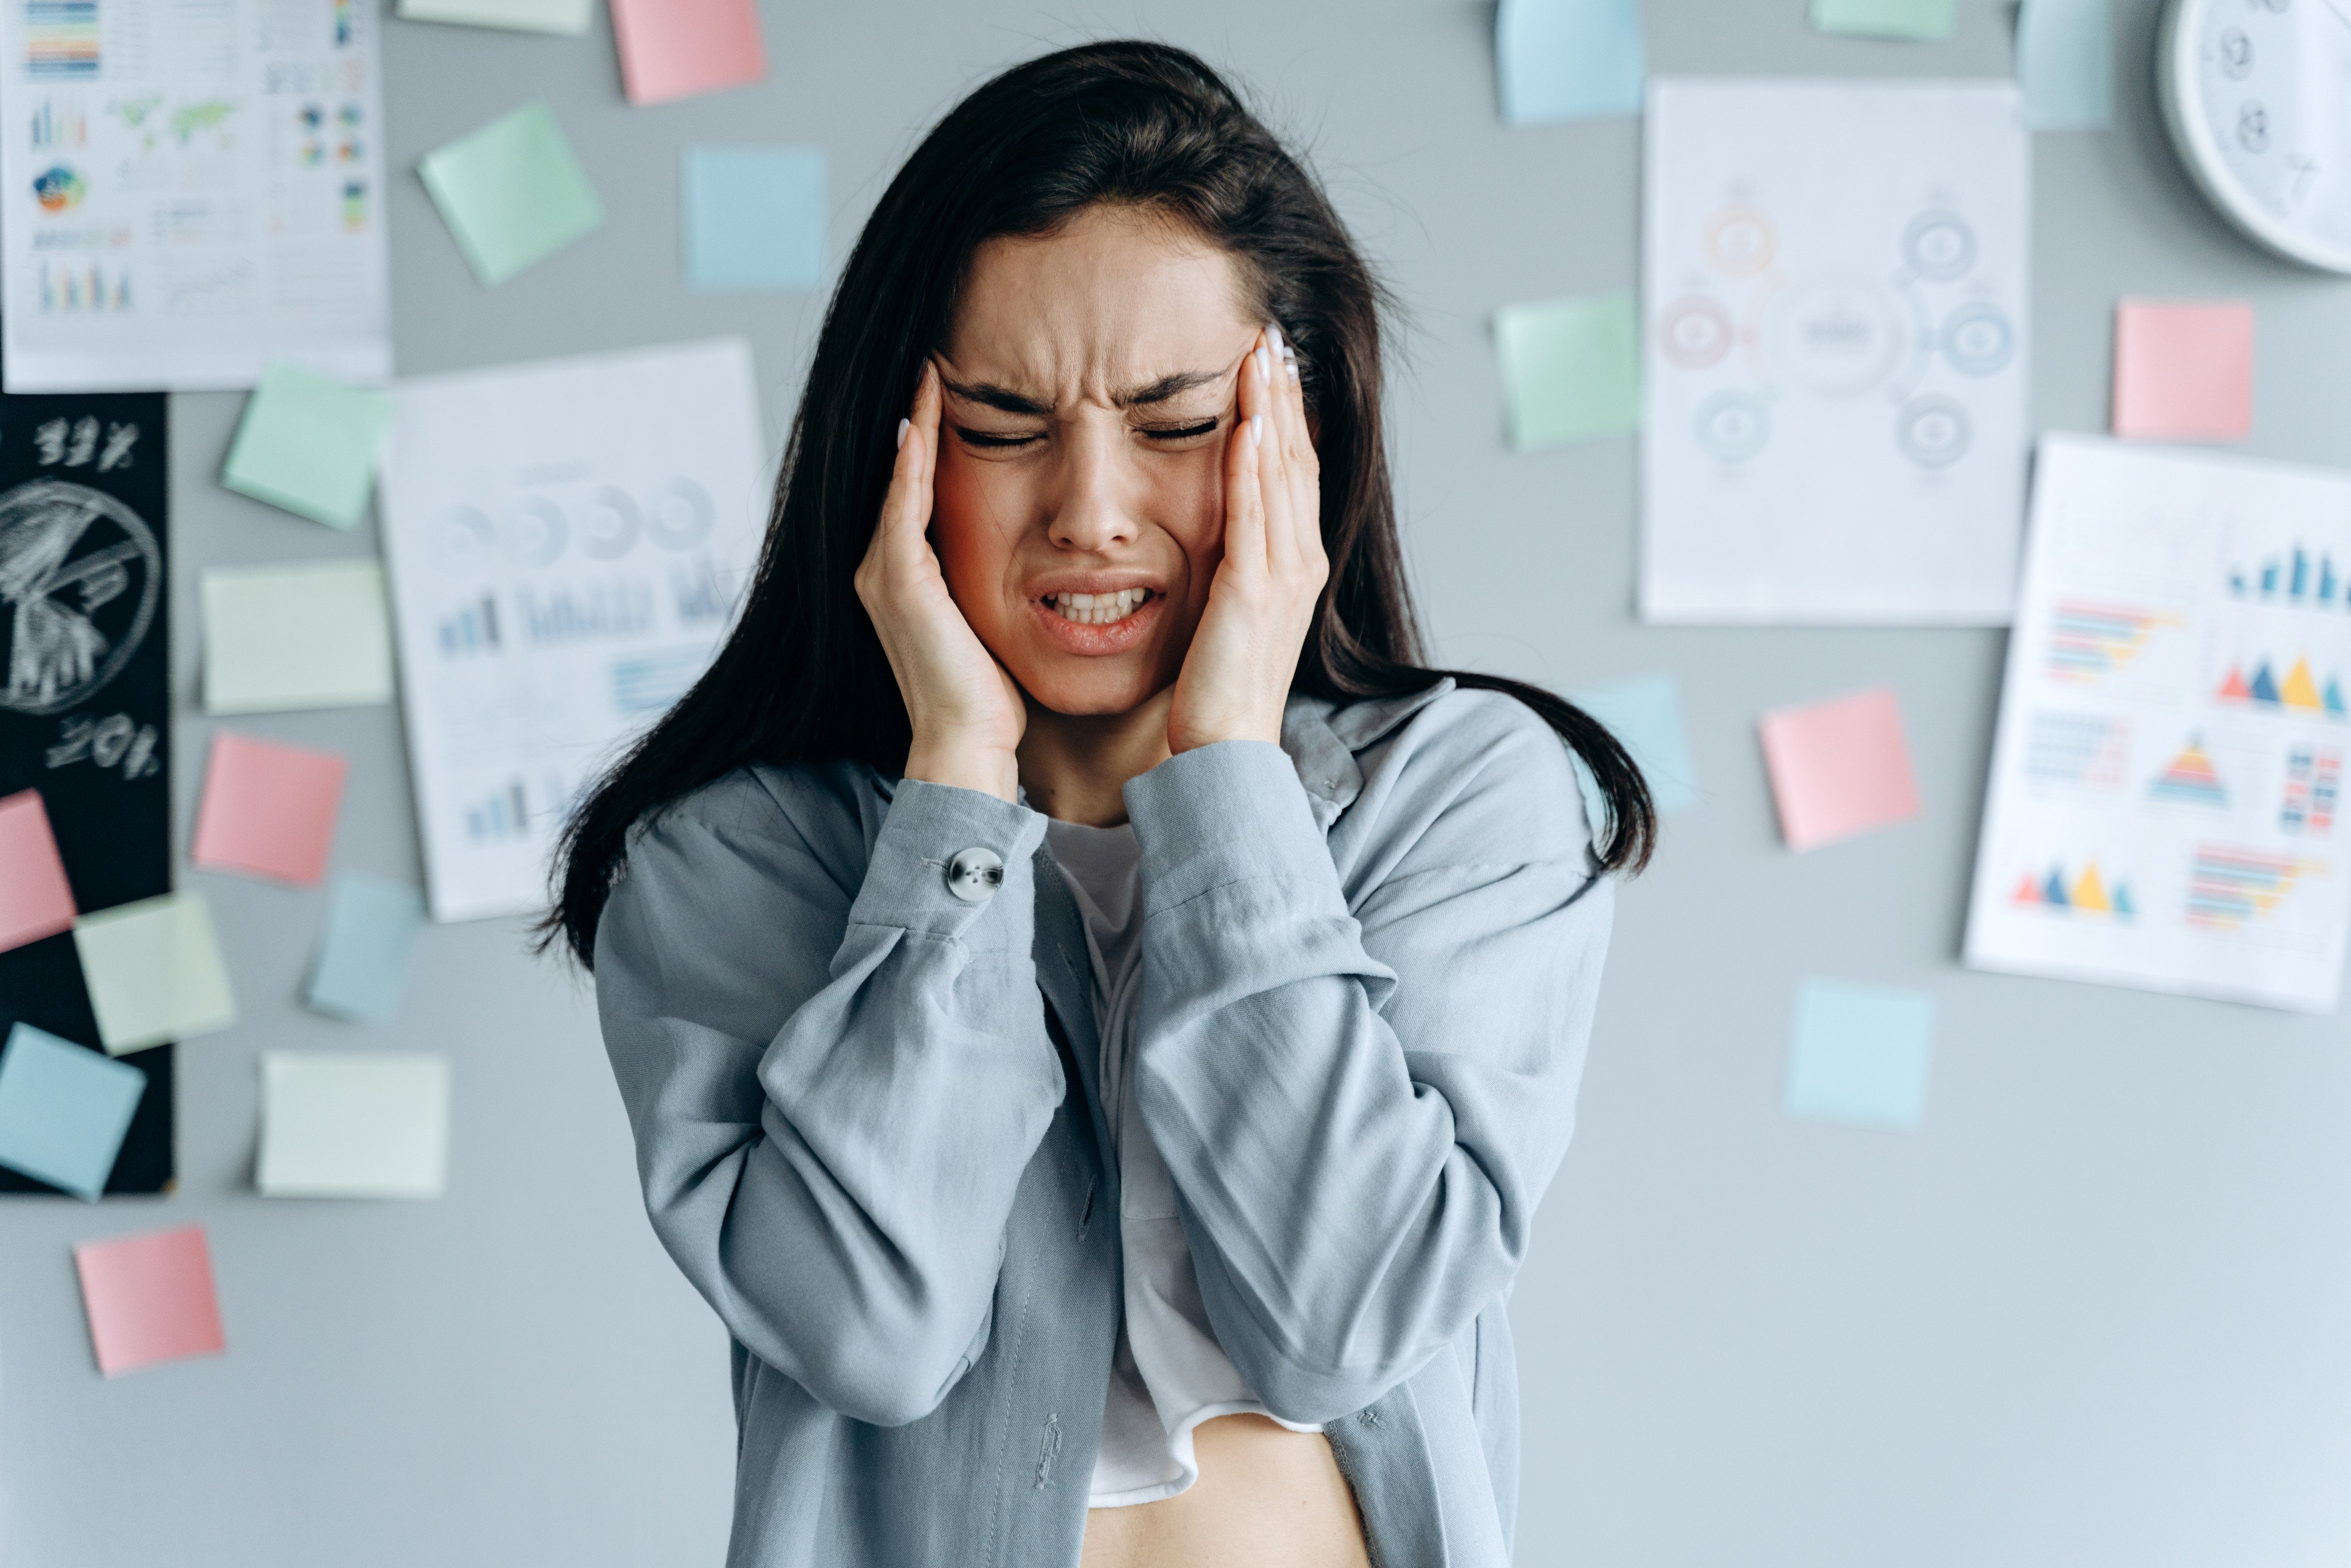 If you take medicine for relief from headaches and migraines, you could develop medication overuse headache - here’s what it is, and advice on bridging treatments when cutting out medication. Photo: Shutterstock